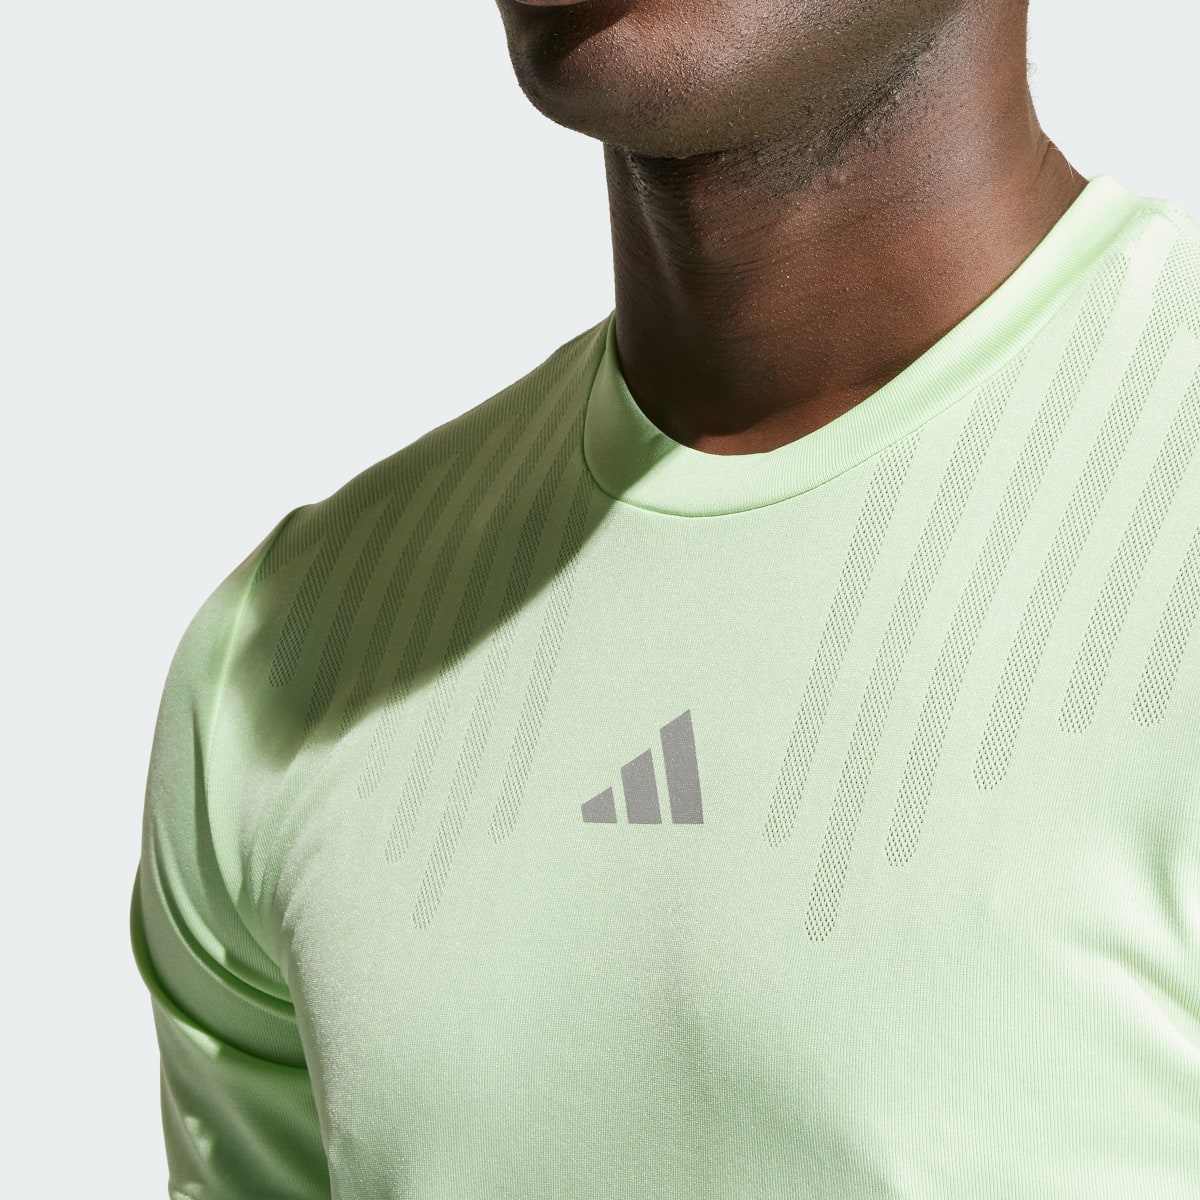 Adidas HIIT Airchill Workout Tee. 6